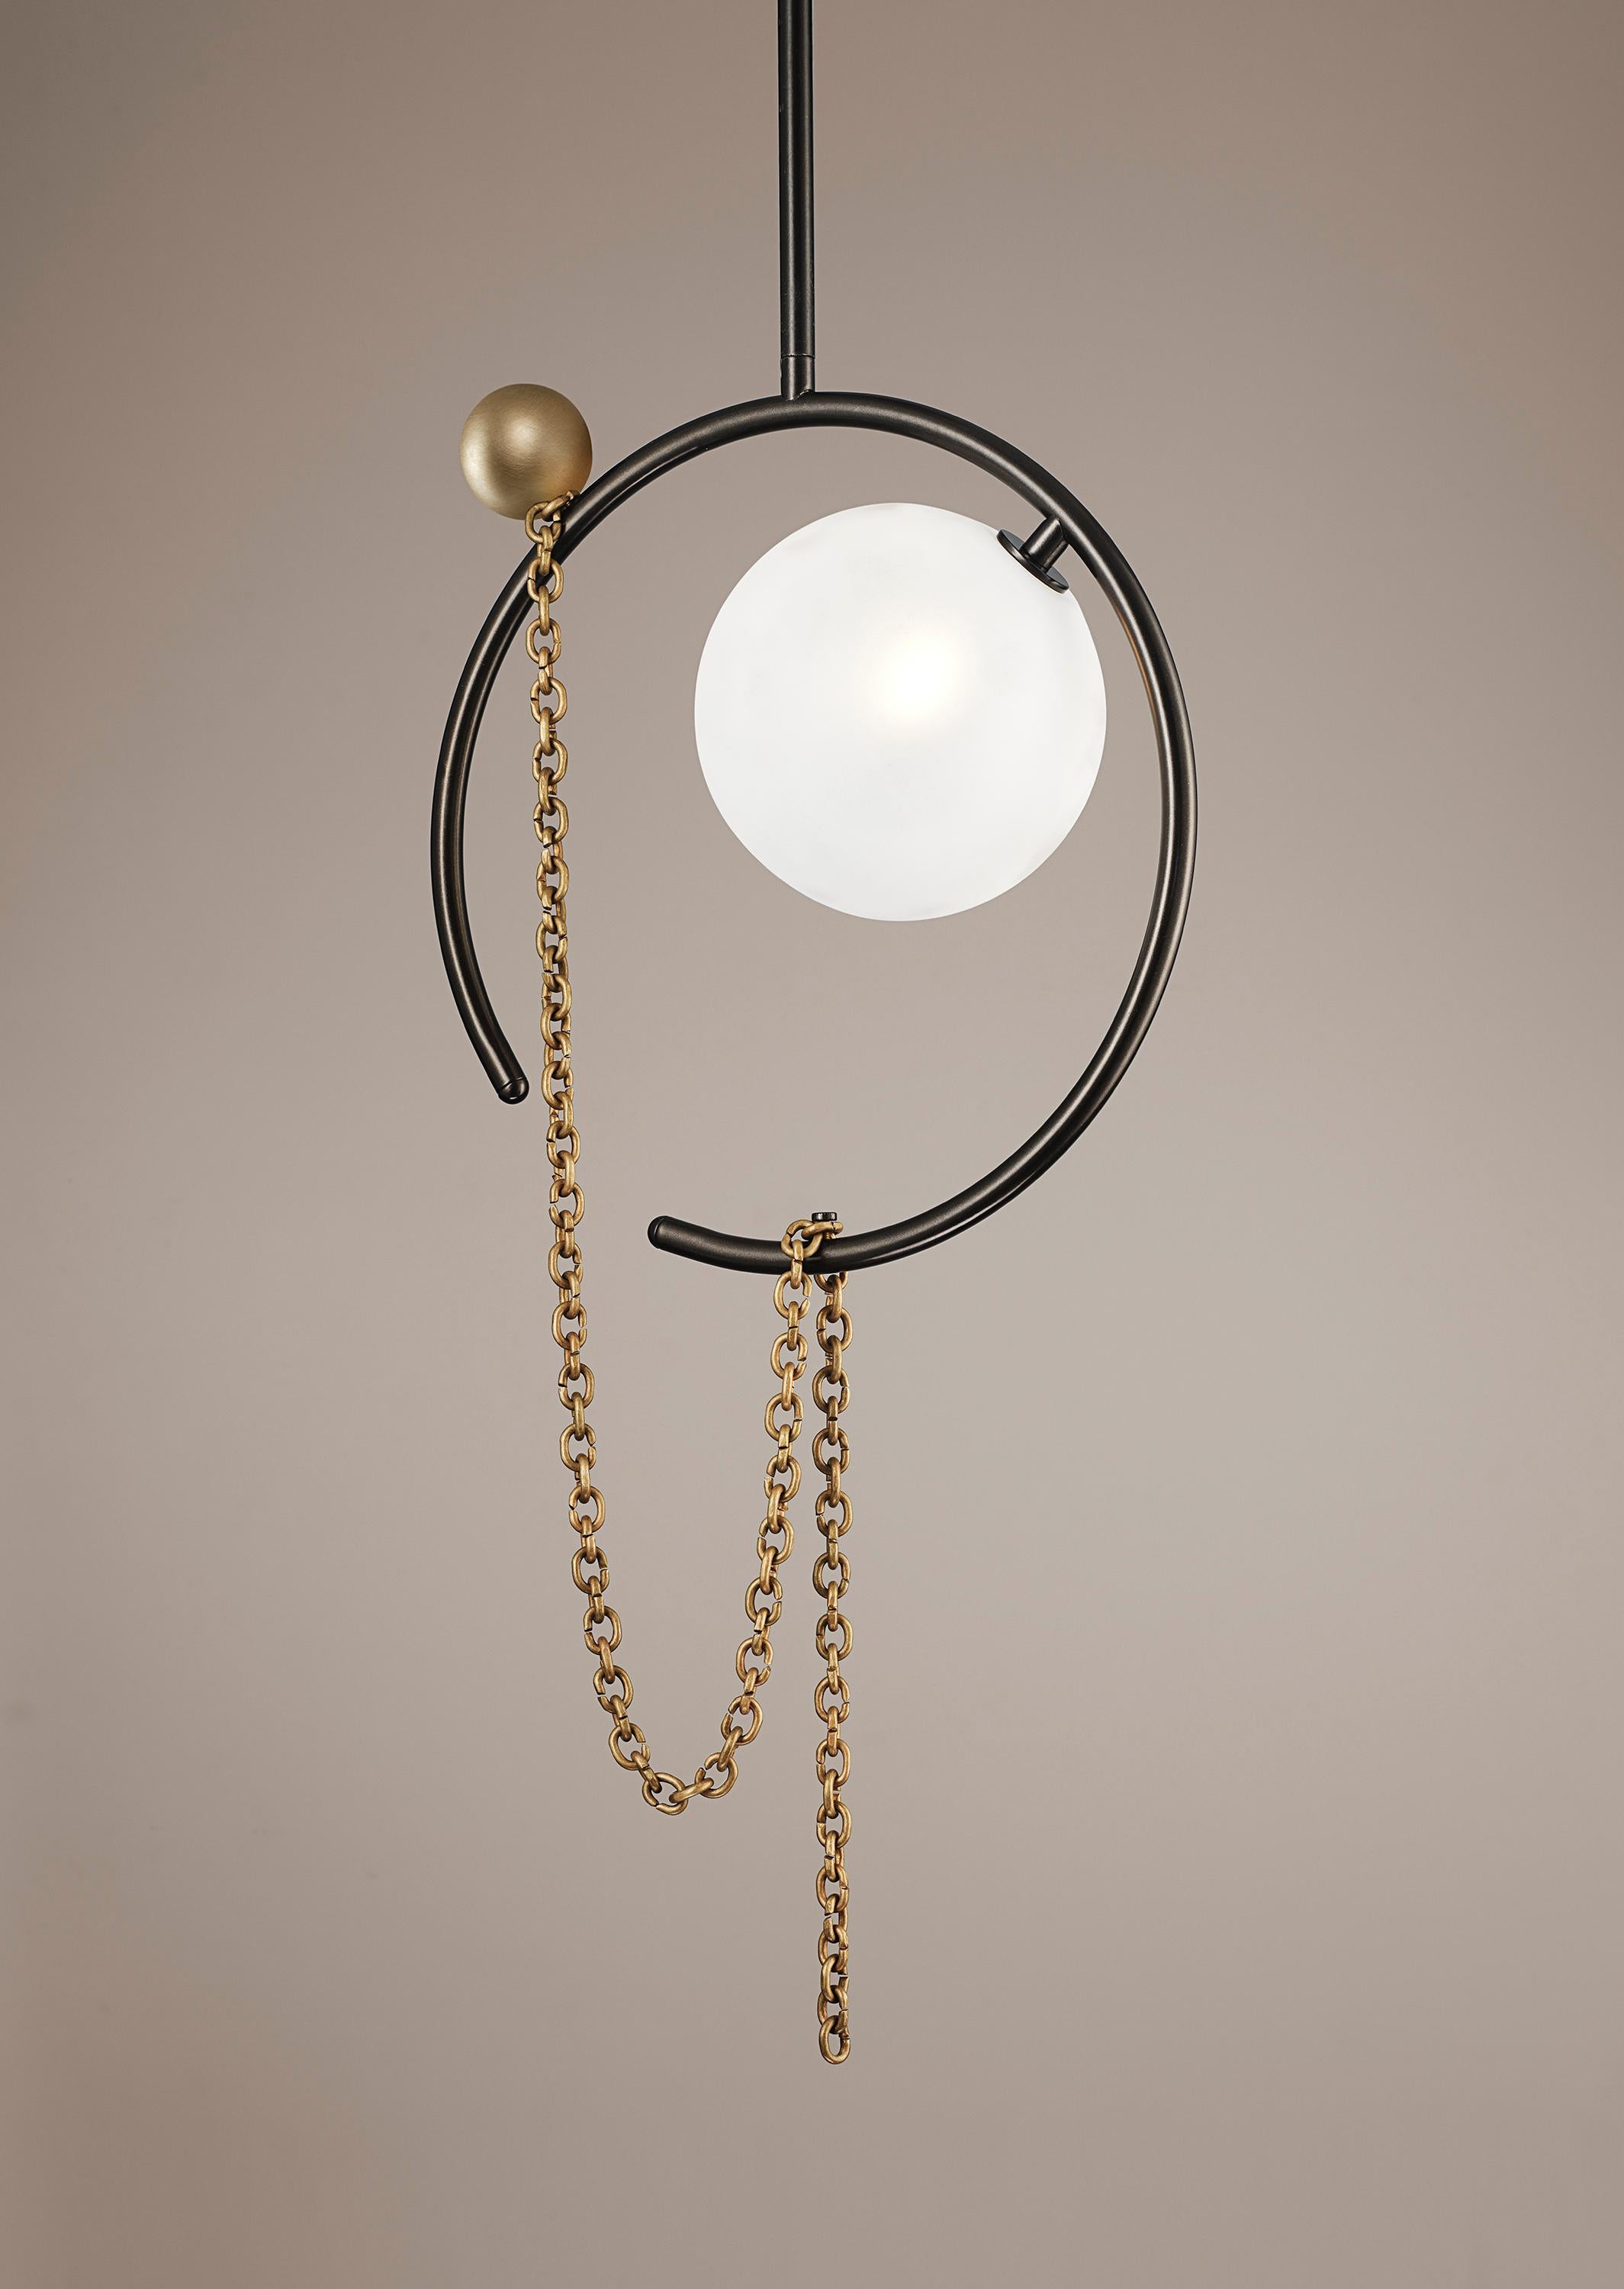 MADELEINE PENDANT

Introducing the Madeleine Pendant, a daring piece that challenges the norms of lighting. Just as Dior's designs defied conventions, this pendant's captivating asymmetry creates an intriguing visual narrative, ensuring all eyes are